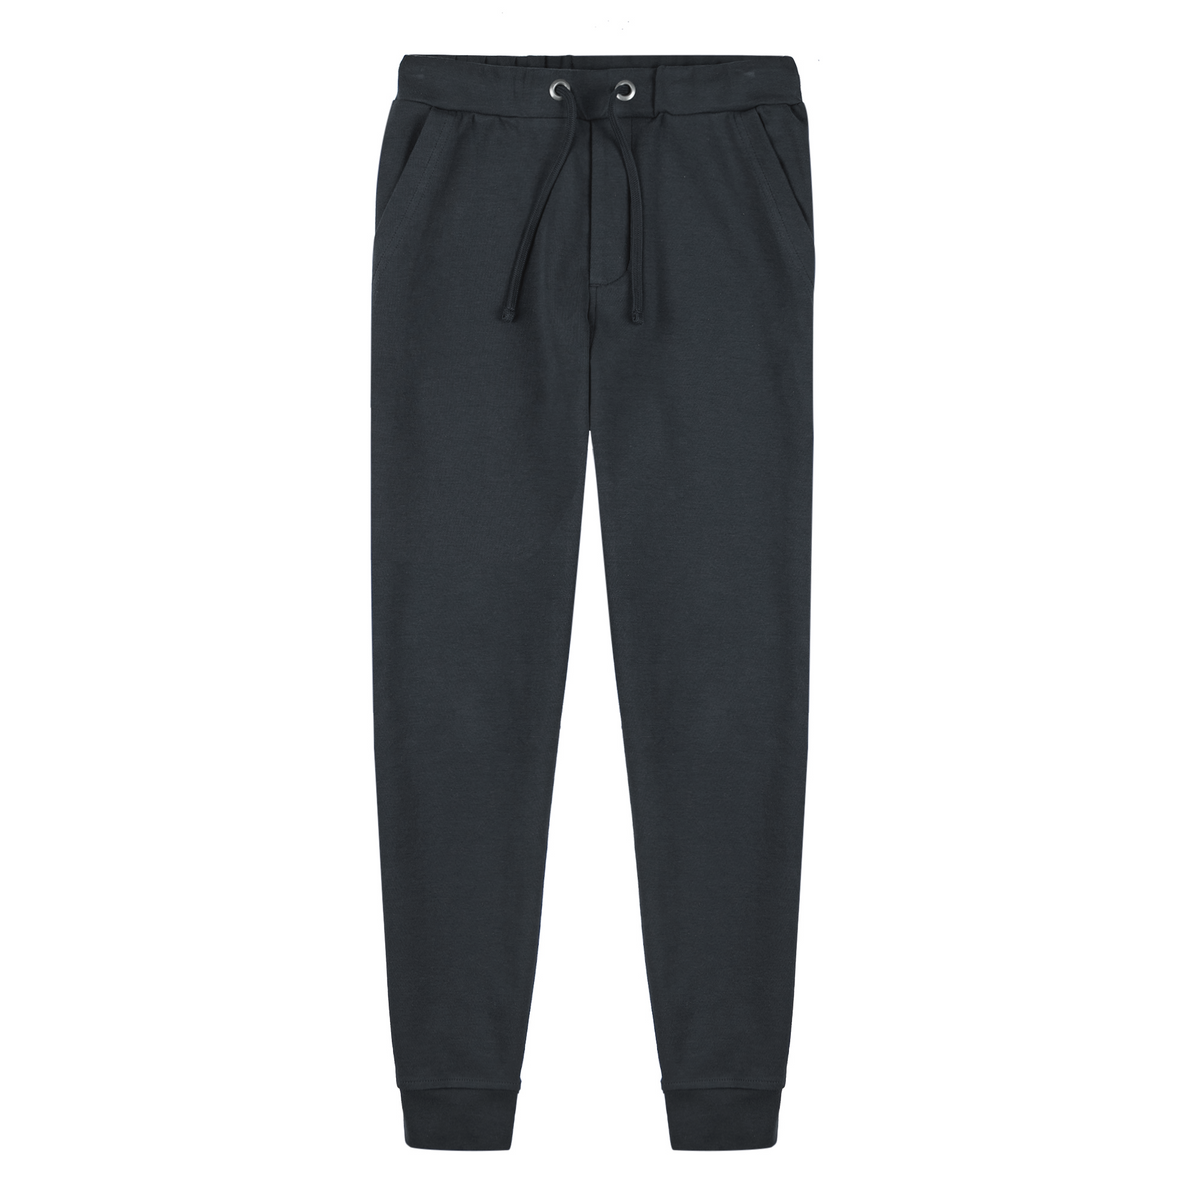 Top 5 Pairs of Elevated Sweatpants — THE EDGE